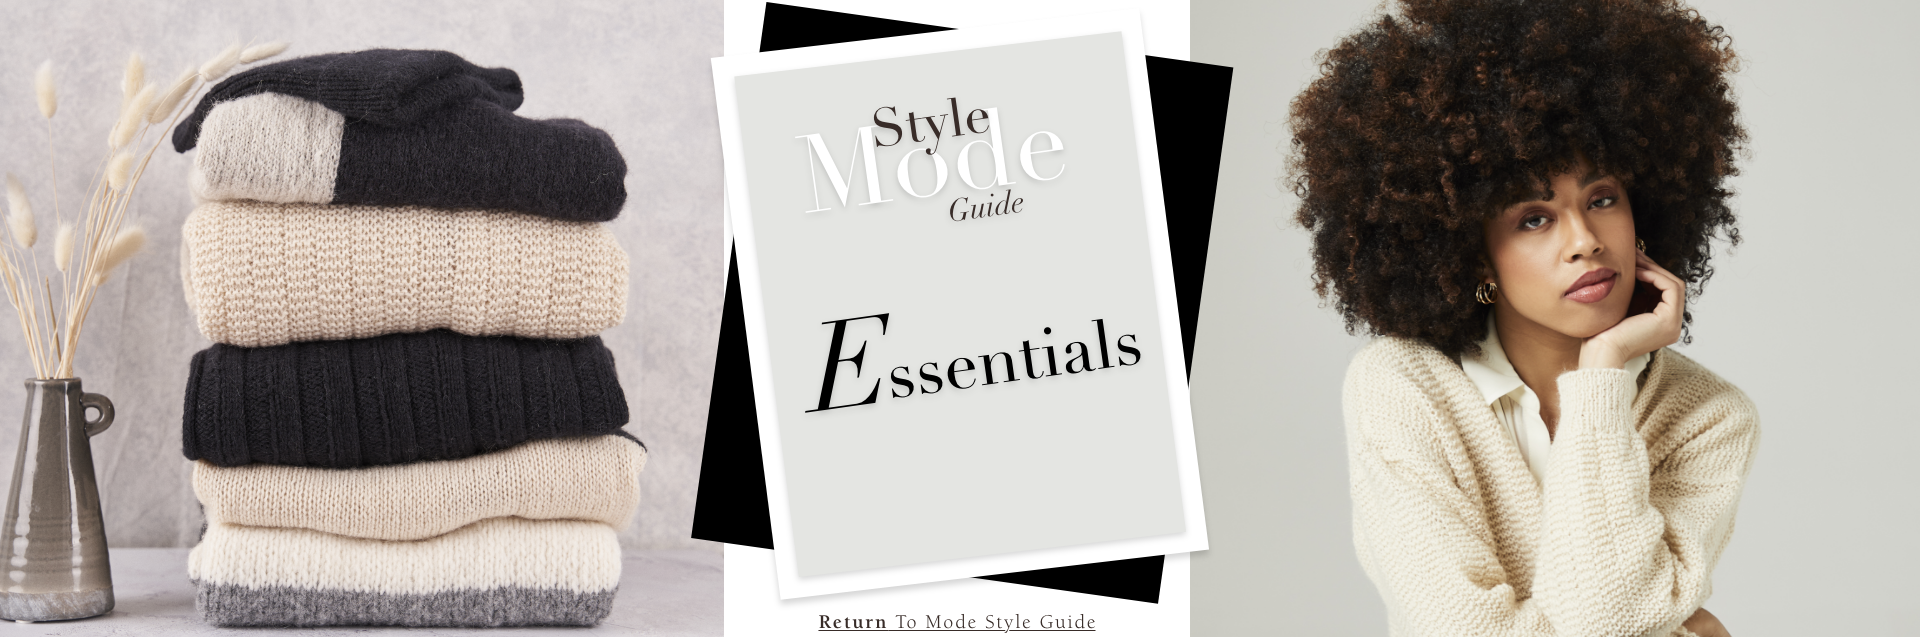 MODE Style Guide Essentials